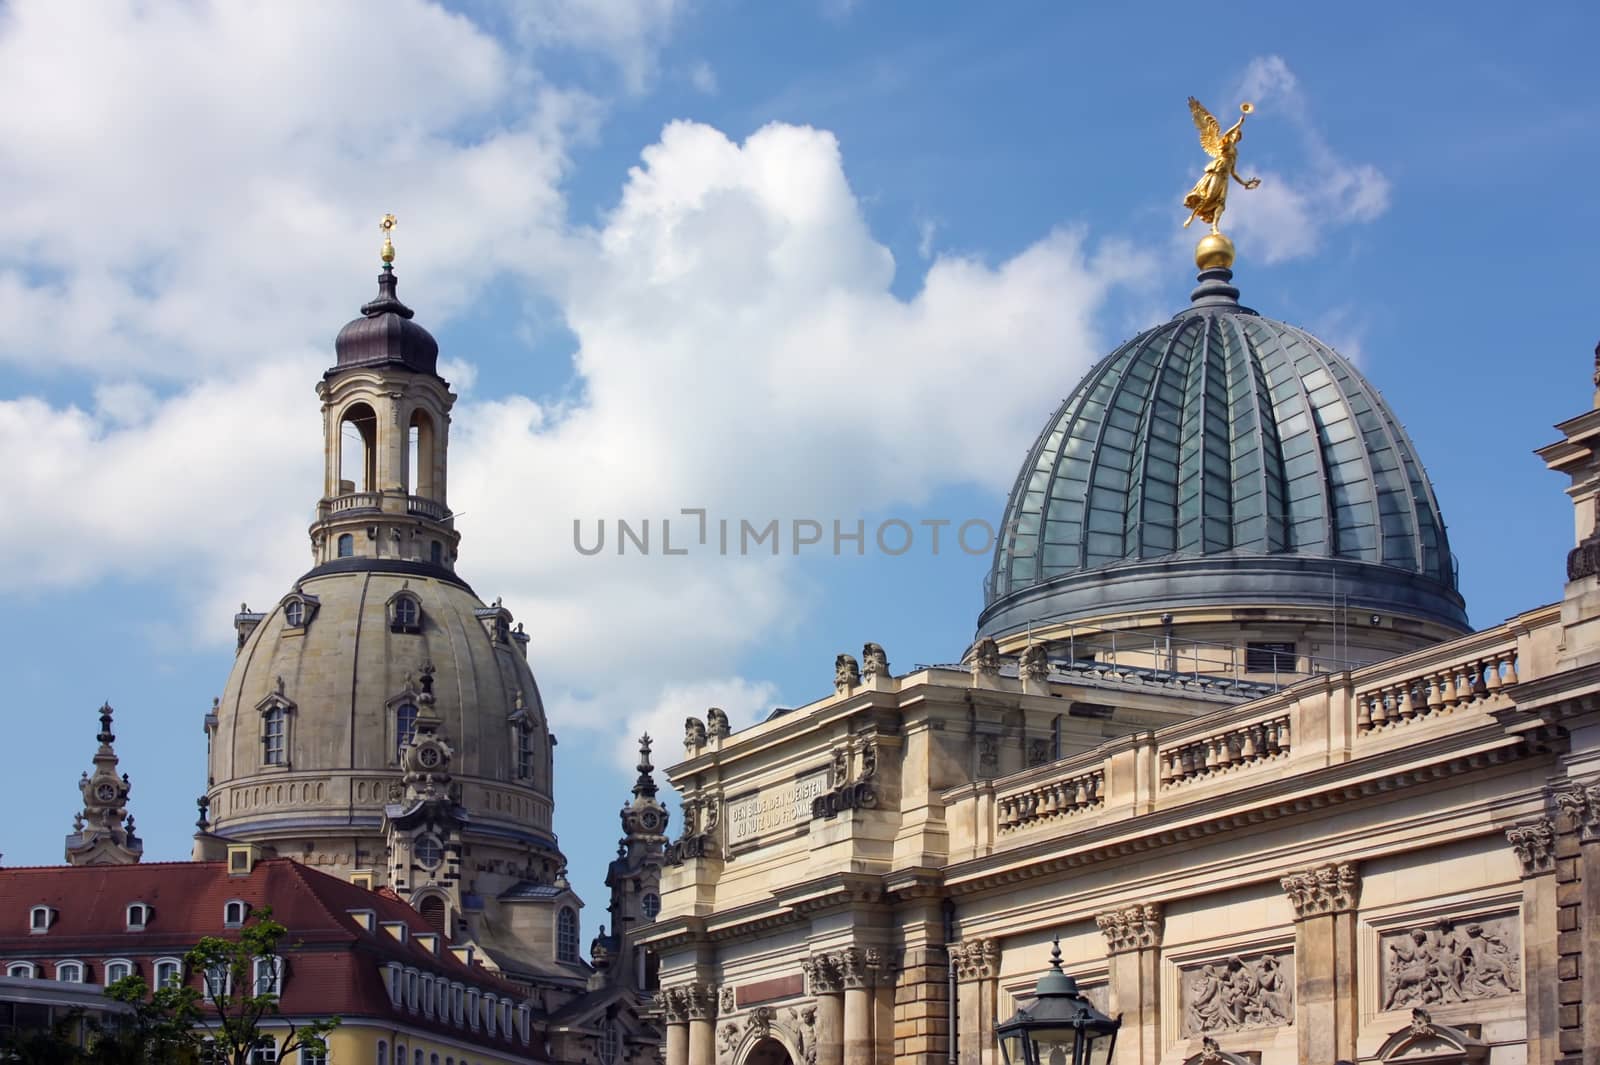 One of Germany’s most beautiful cities, Dresden first gained its pre-eminence in the year 1485